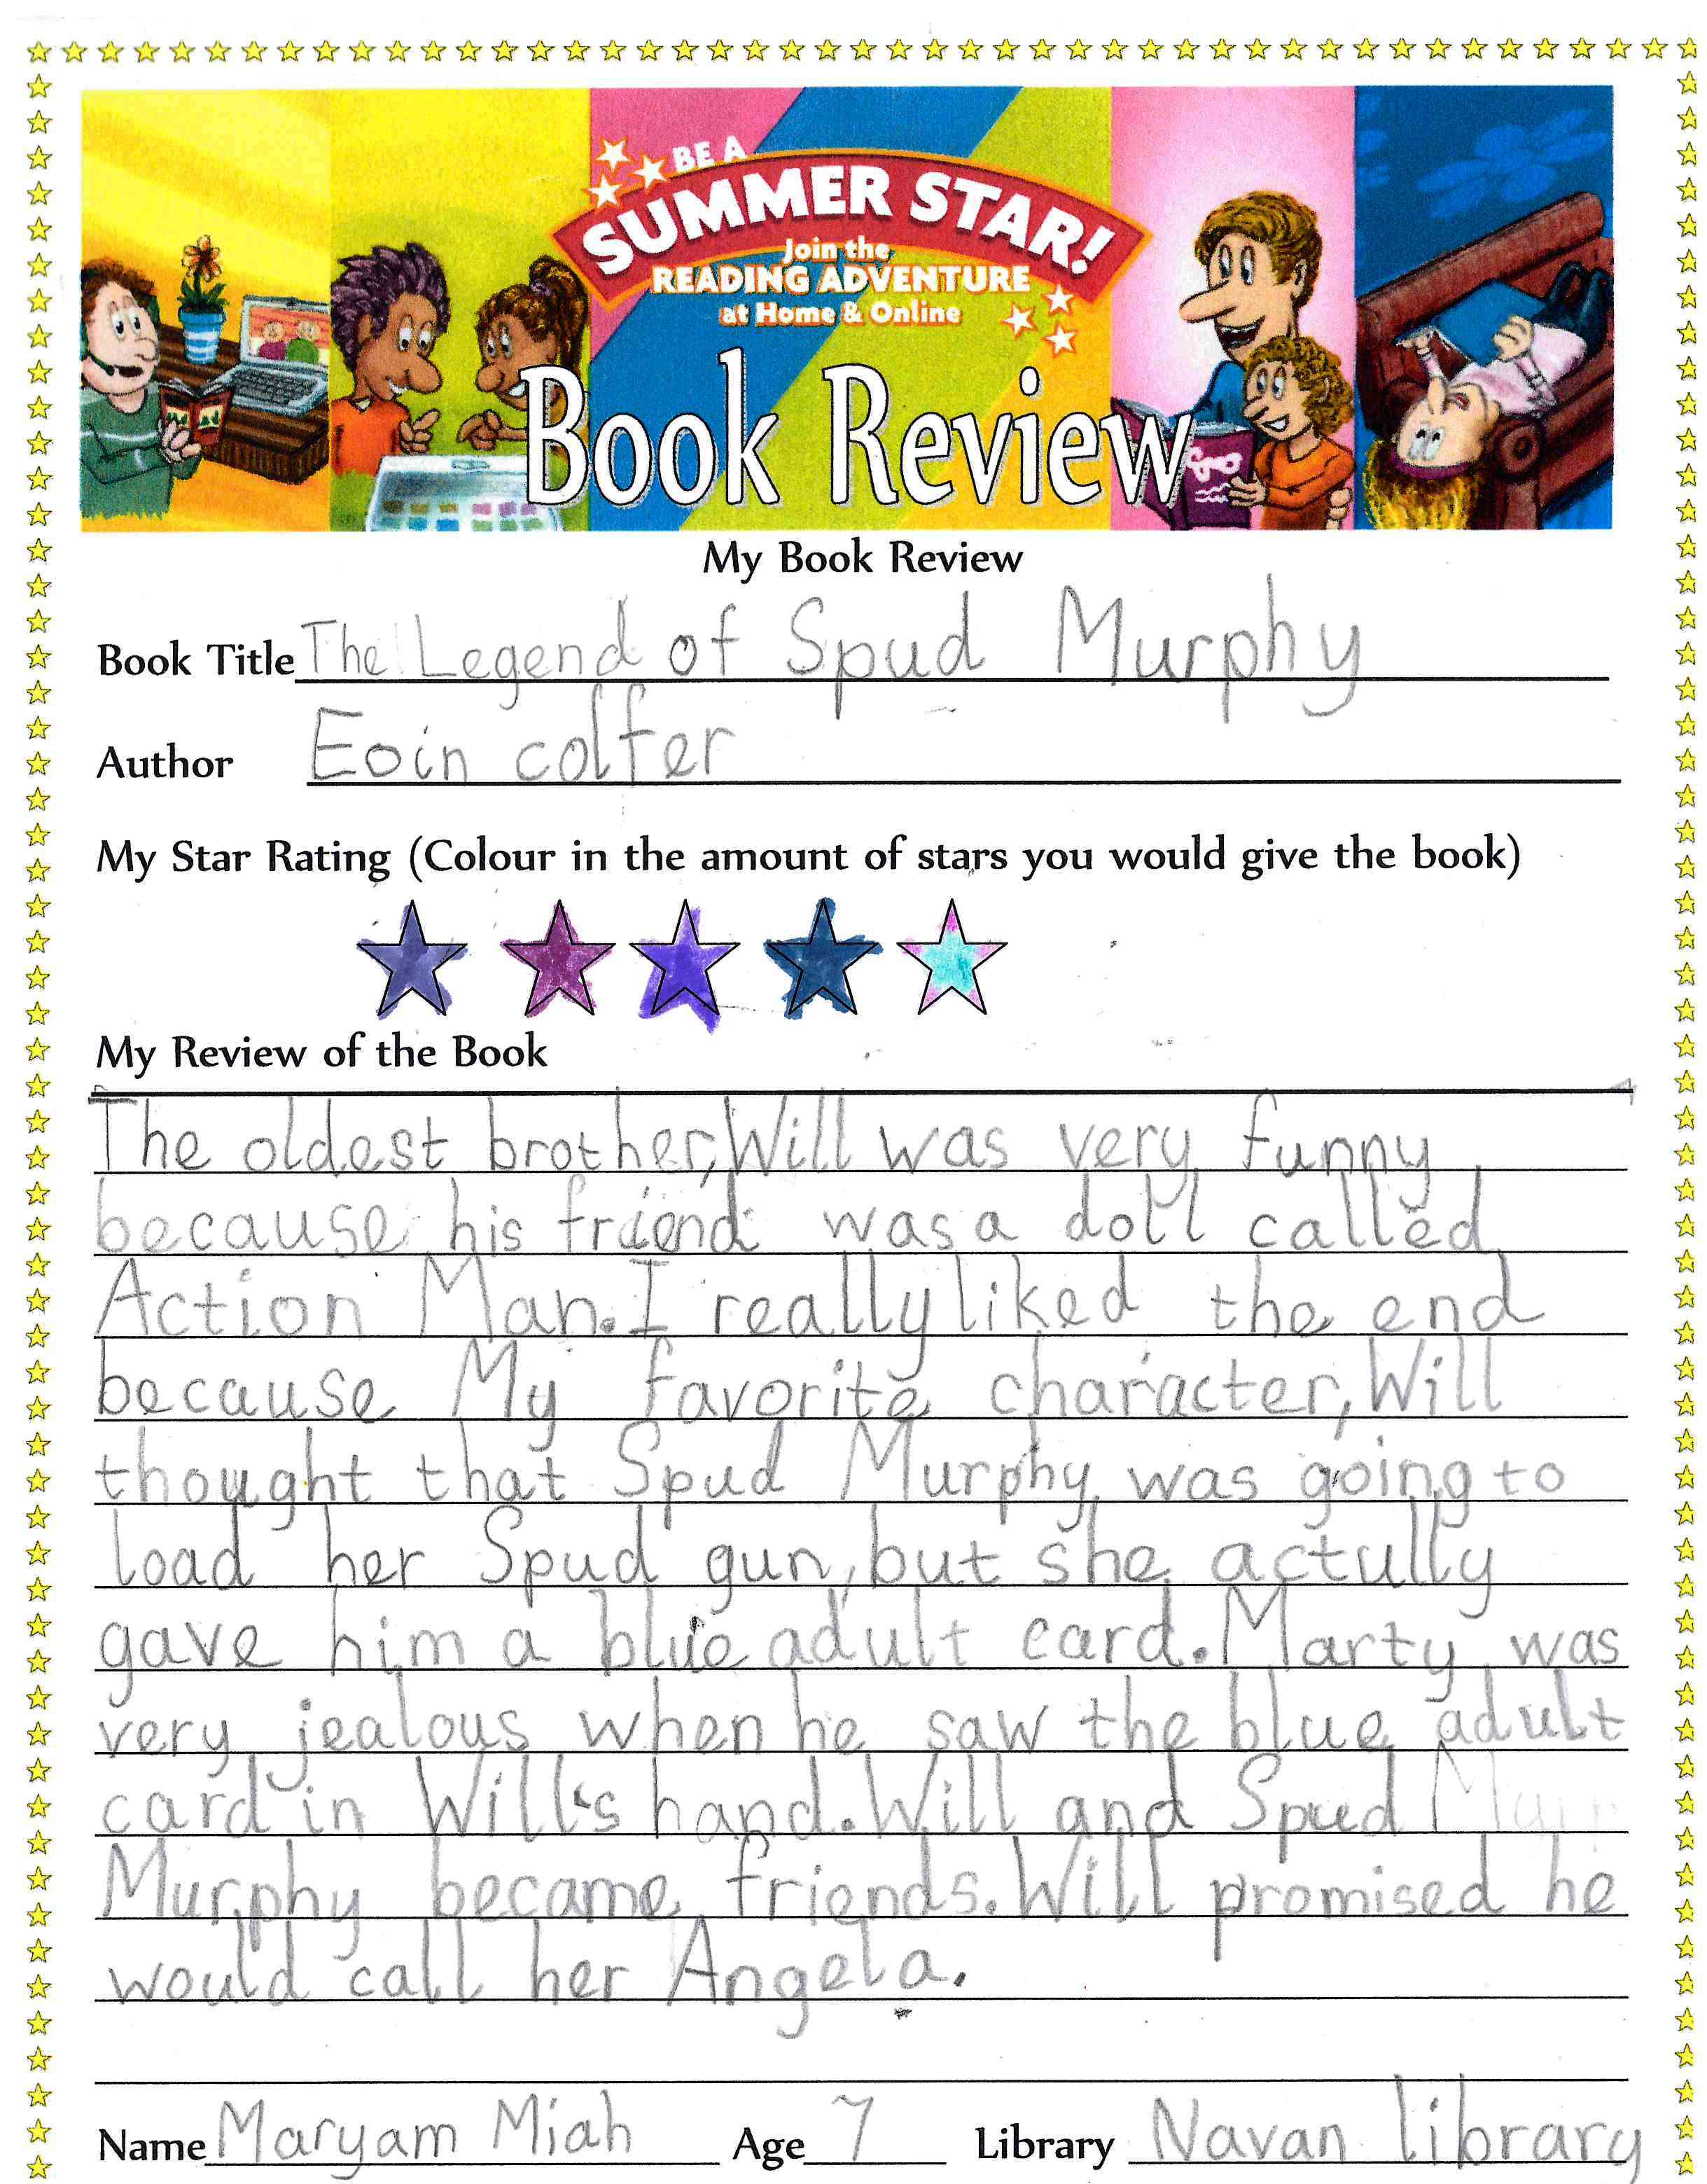 Maryam's Book Review of The Legend of Spud Murphy by Eoin Colfer